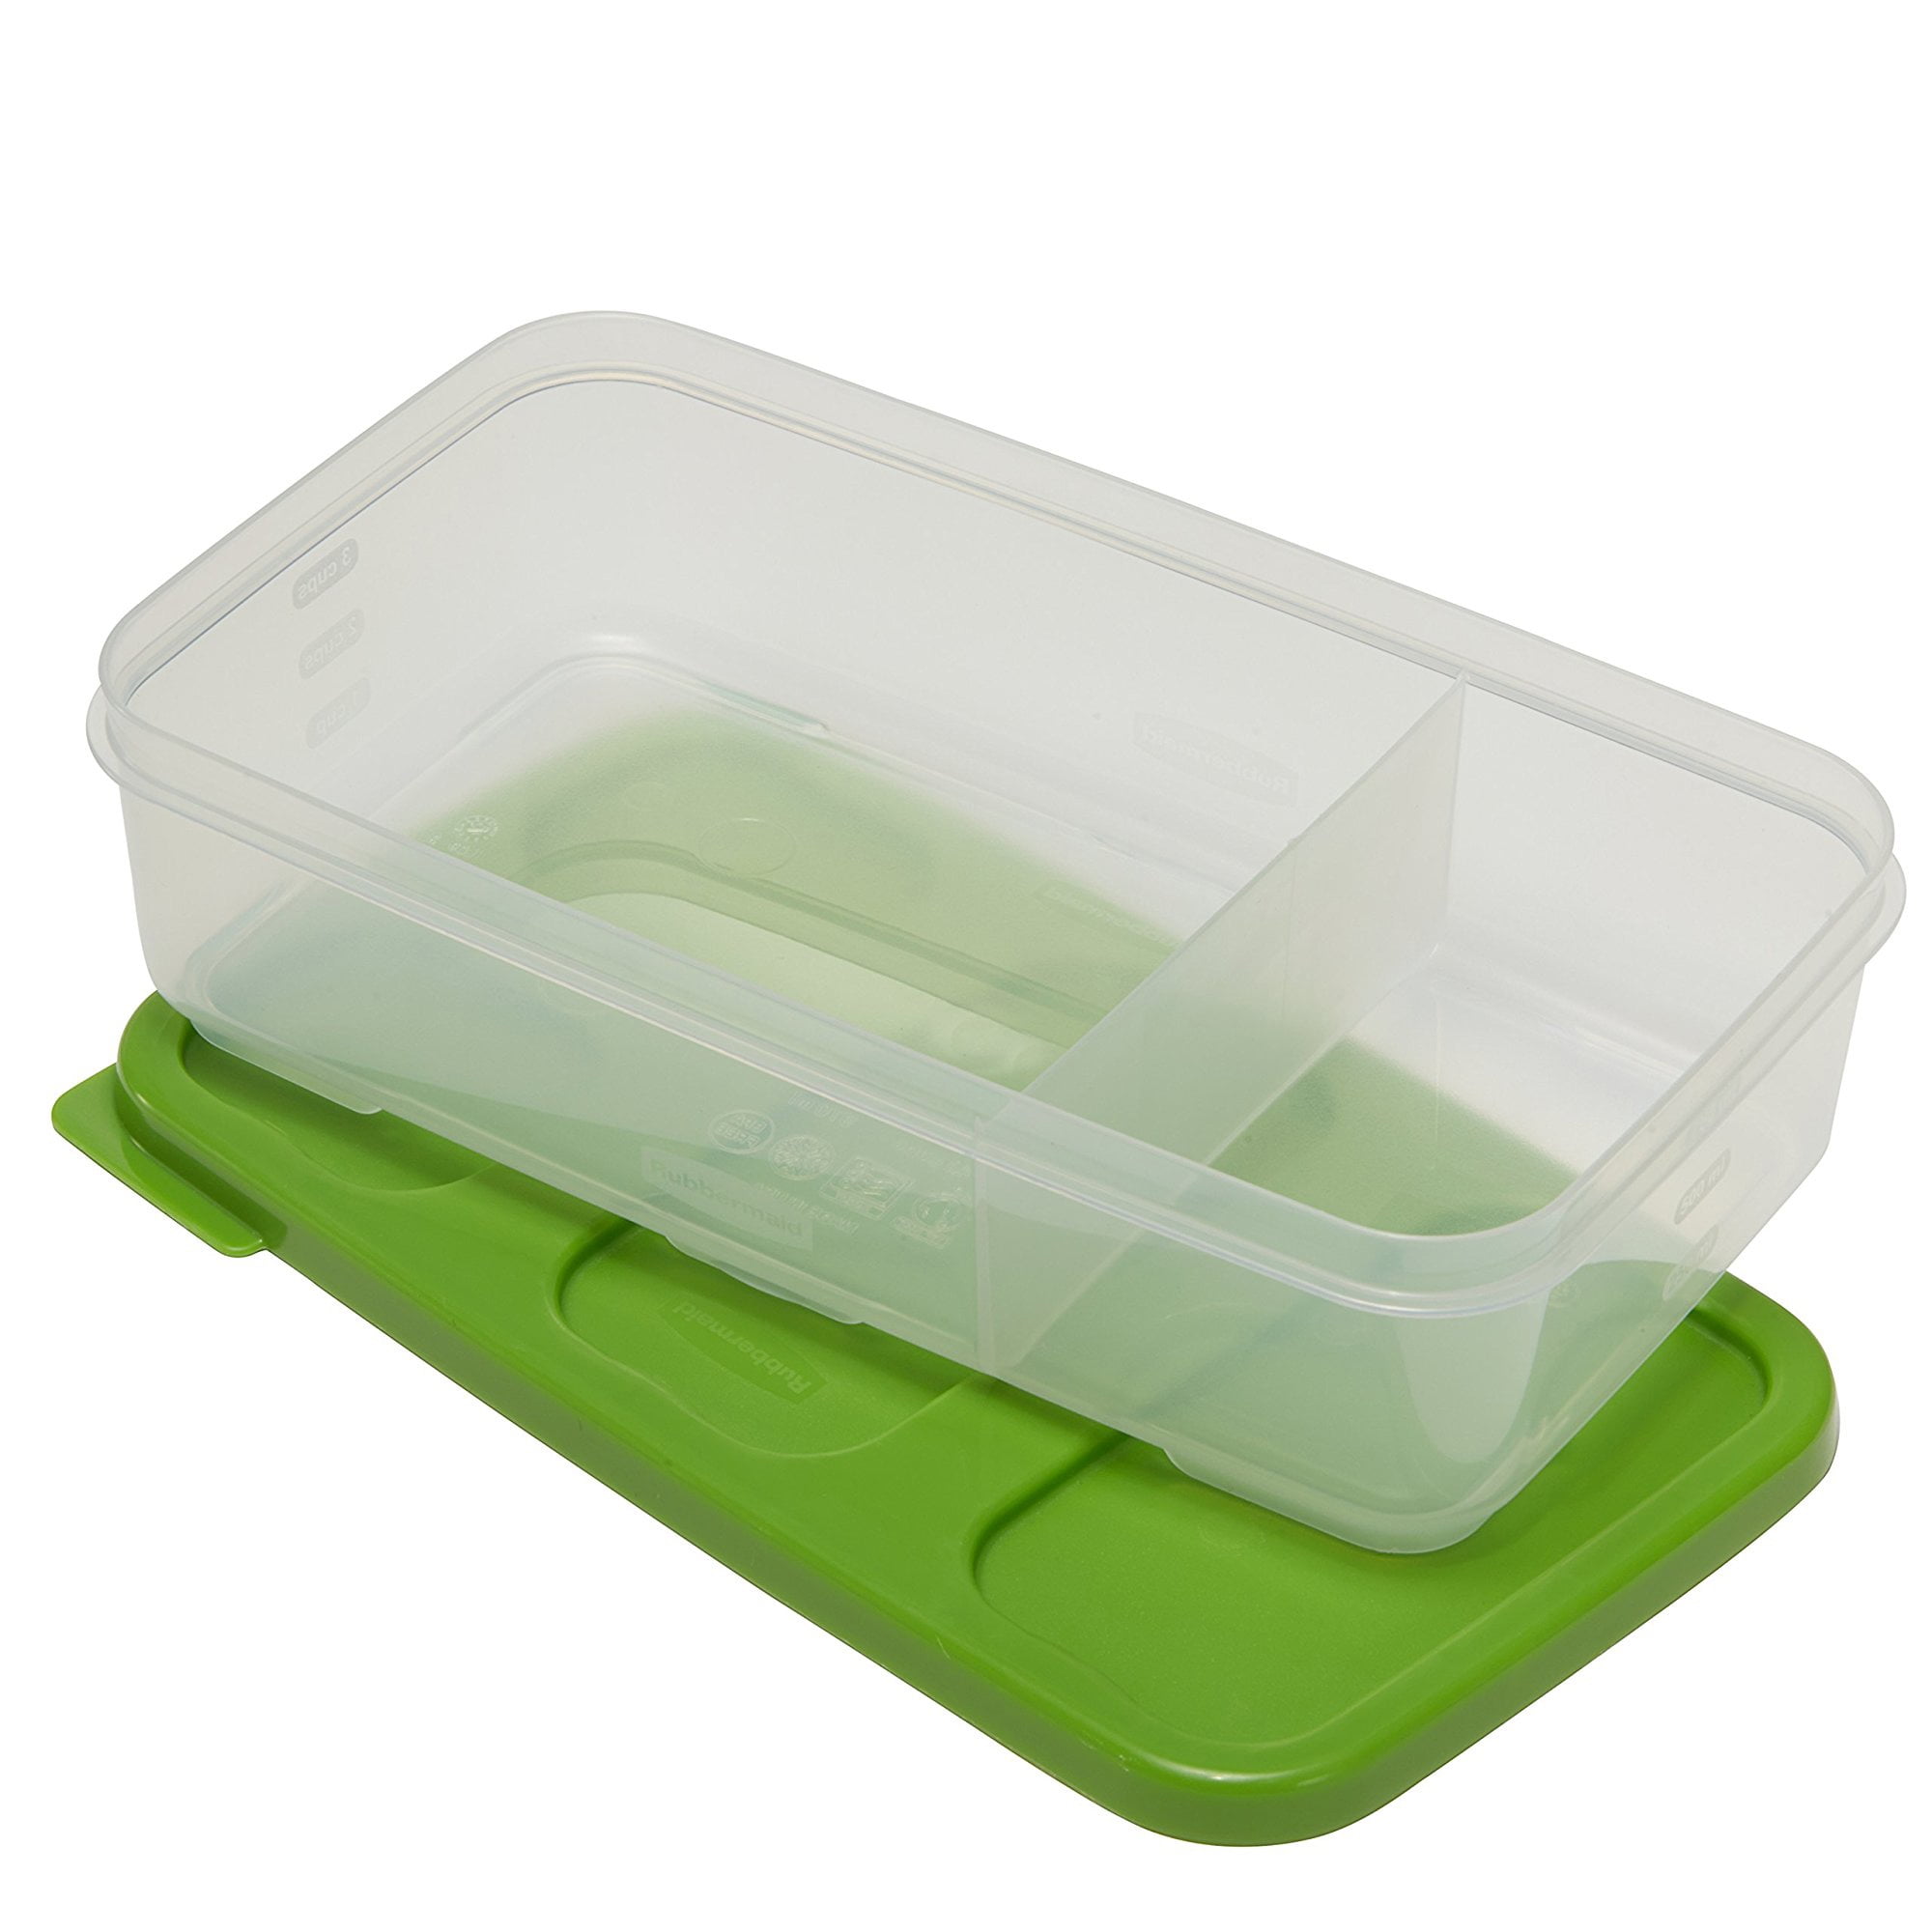 Rubbermaid Lunch Blox - 4.1 Cups, 1.0 CT 